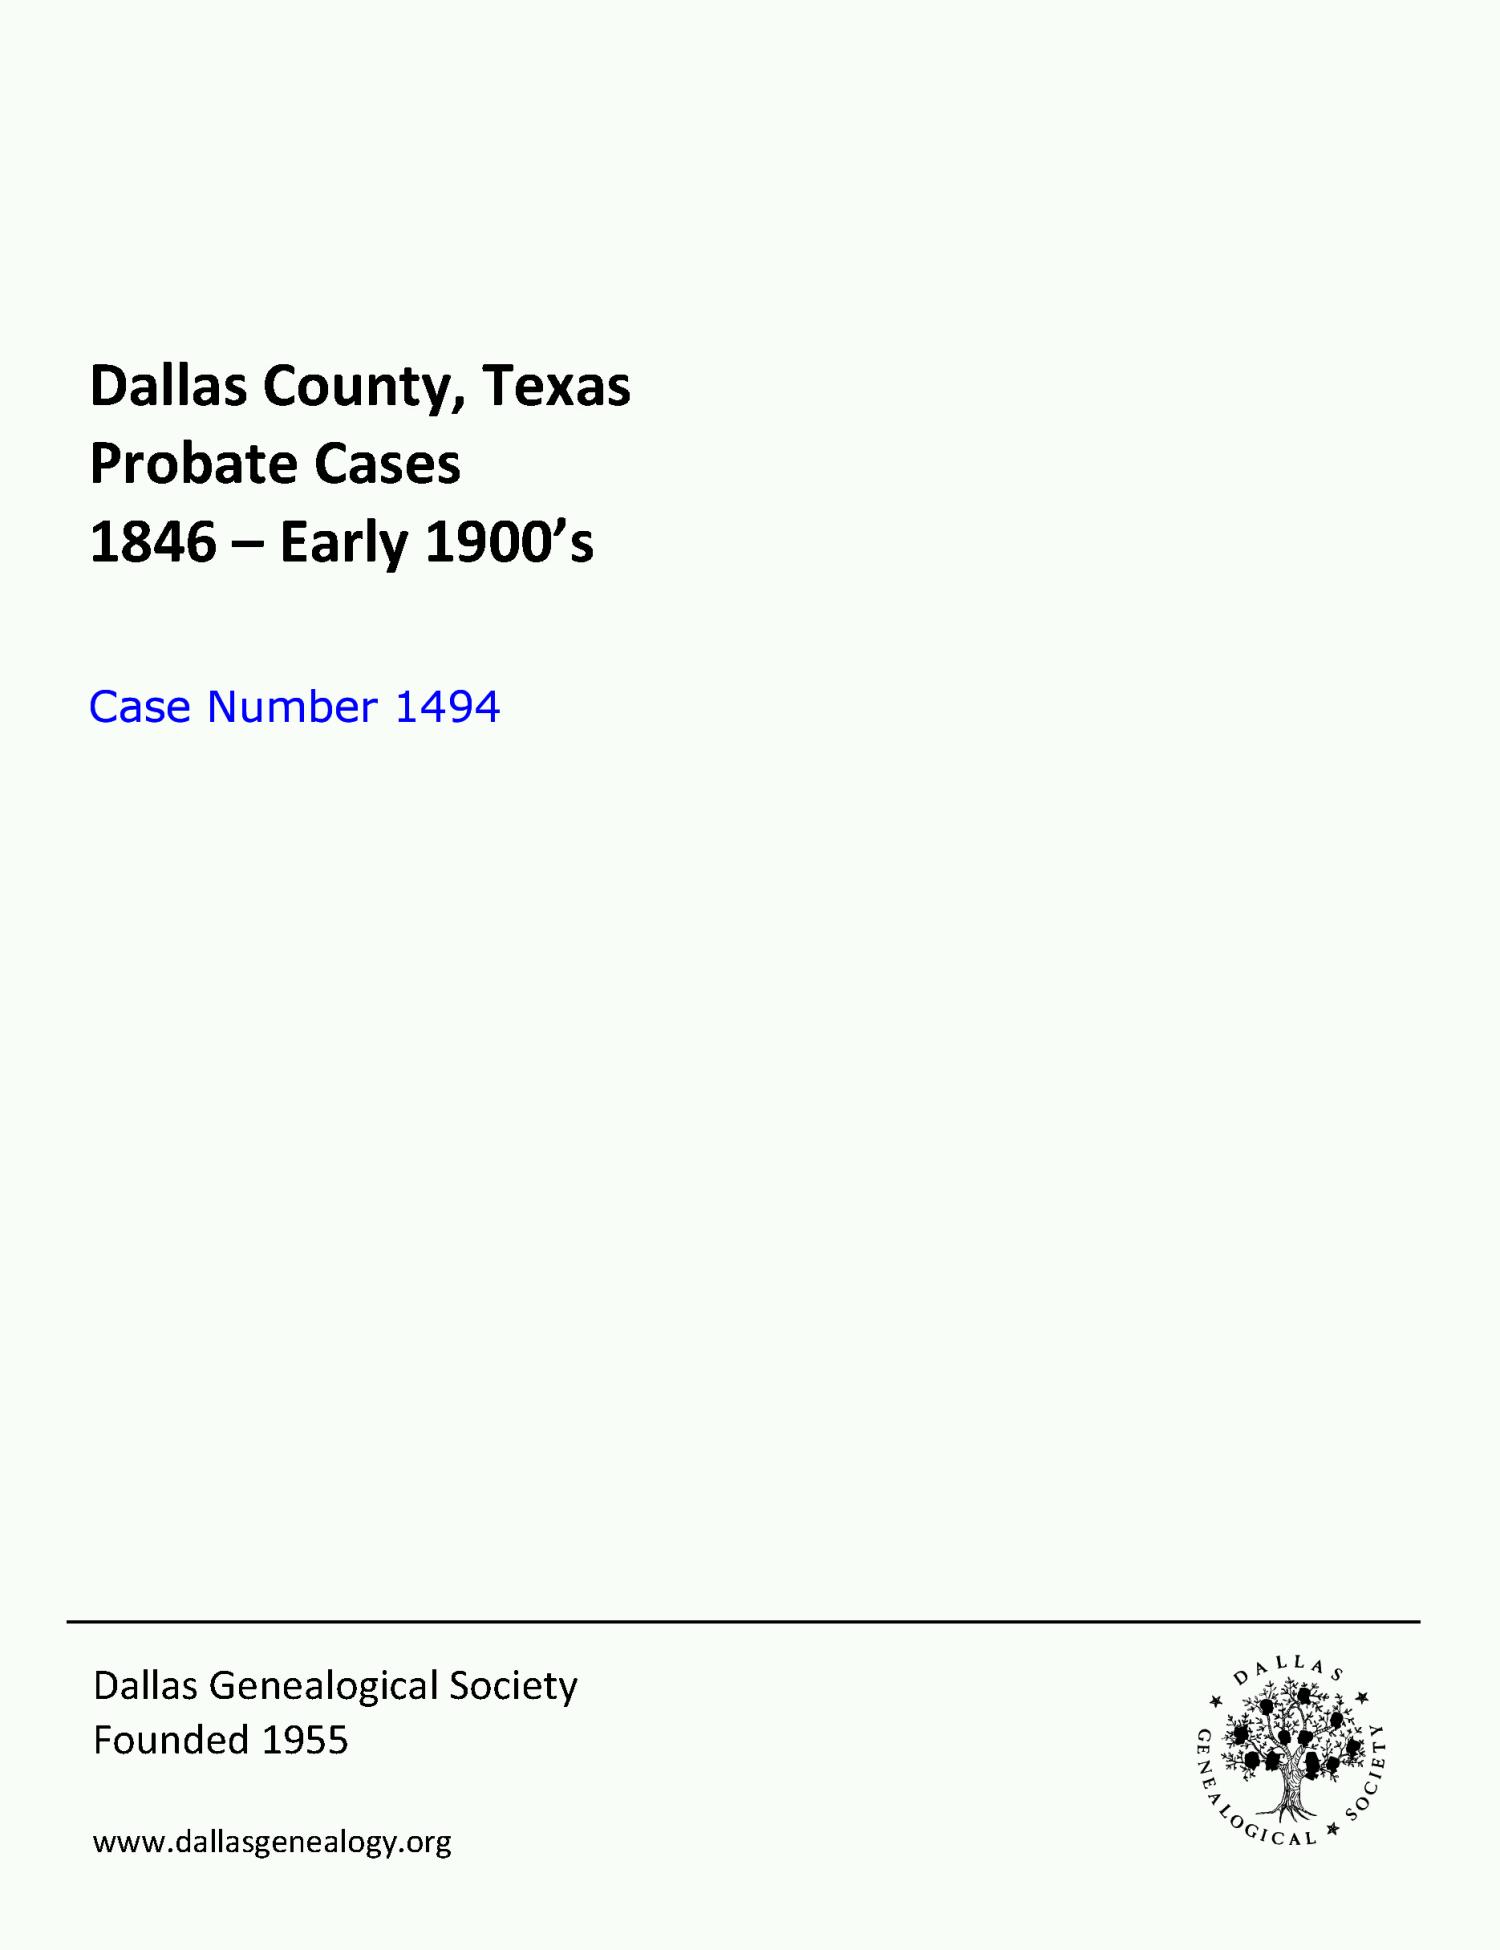 Dallas County Probate Case 1494: Kidd, Jas. W. (Deceased)
                                                
                                                    [Sequence #]: 1 of 18
                                                